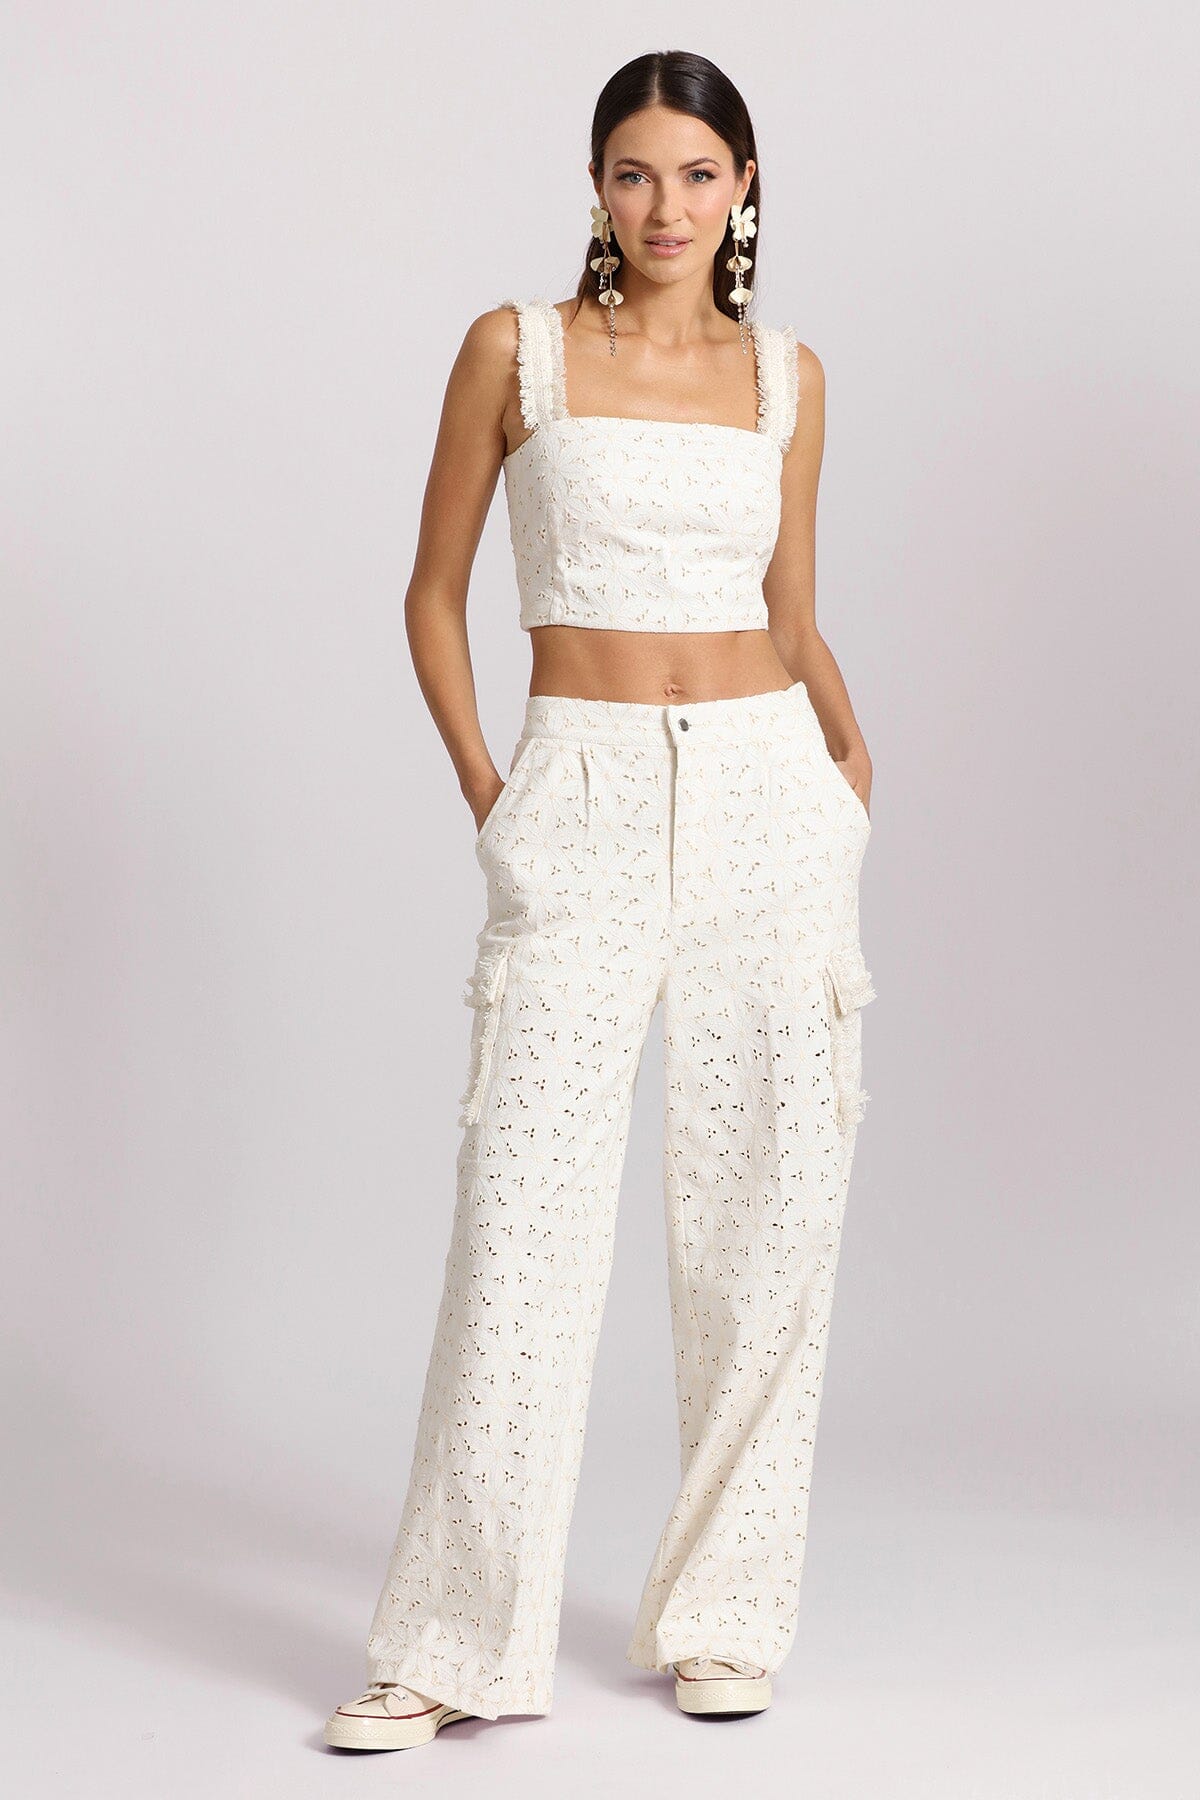 White Cotton Pants For Ladies at best price in Jaipur | ID: 23240036233